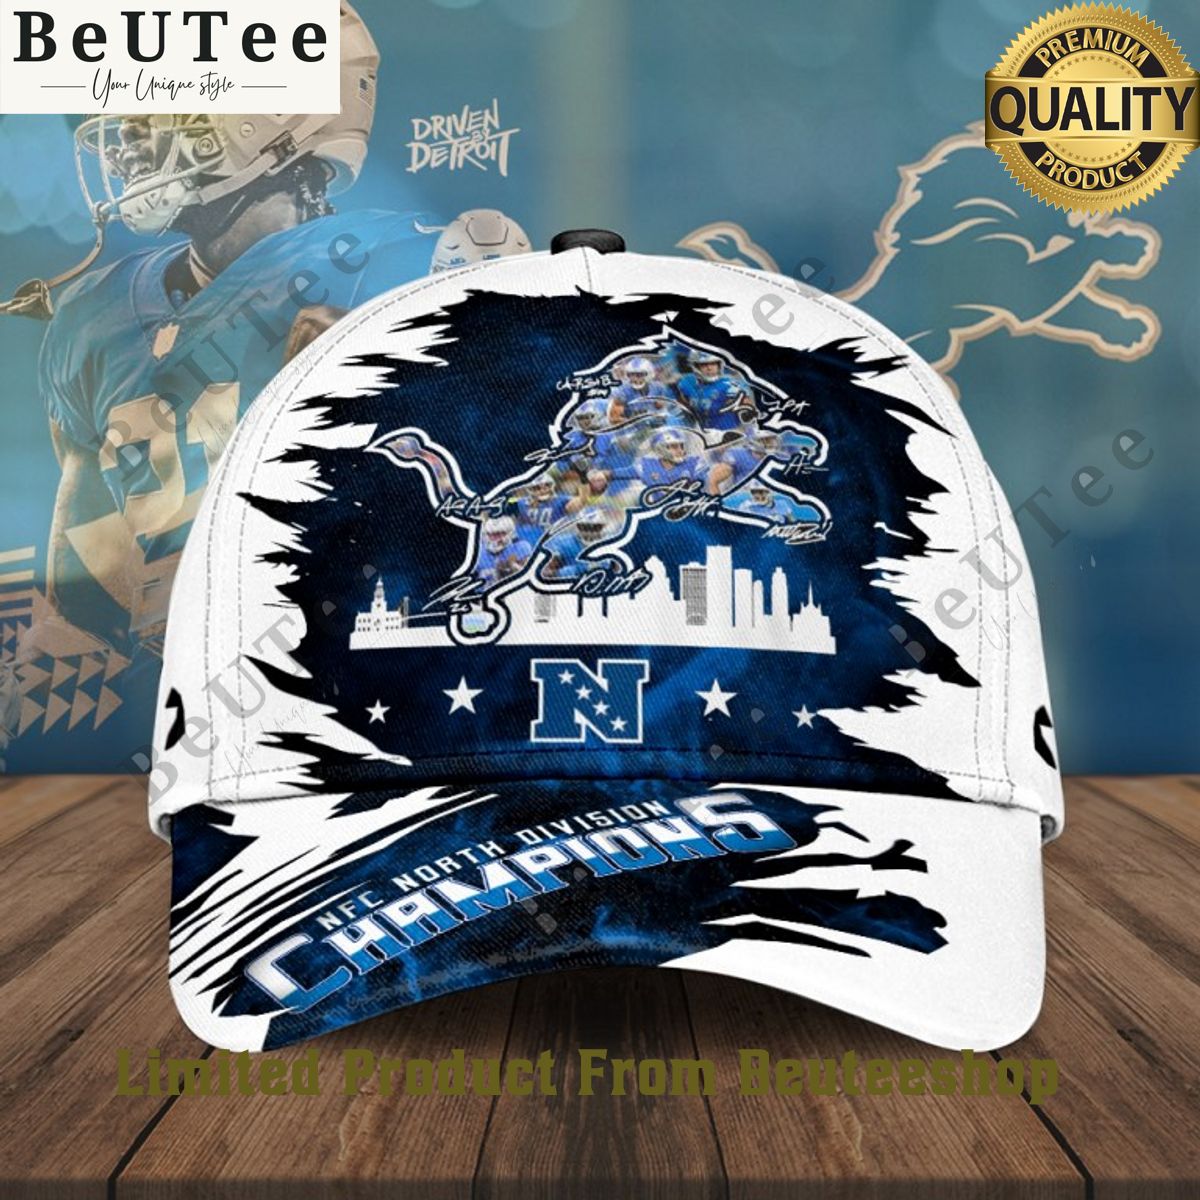 driven by detroit lions nfc north division champions classic printed cap 1 Rtbe4.jpg